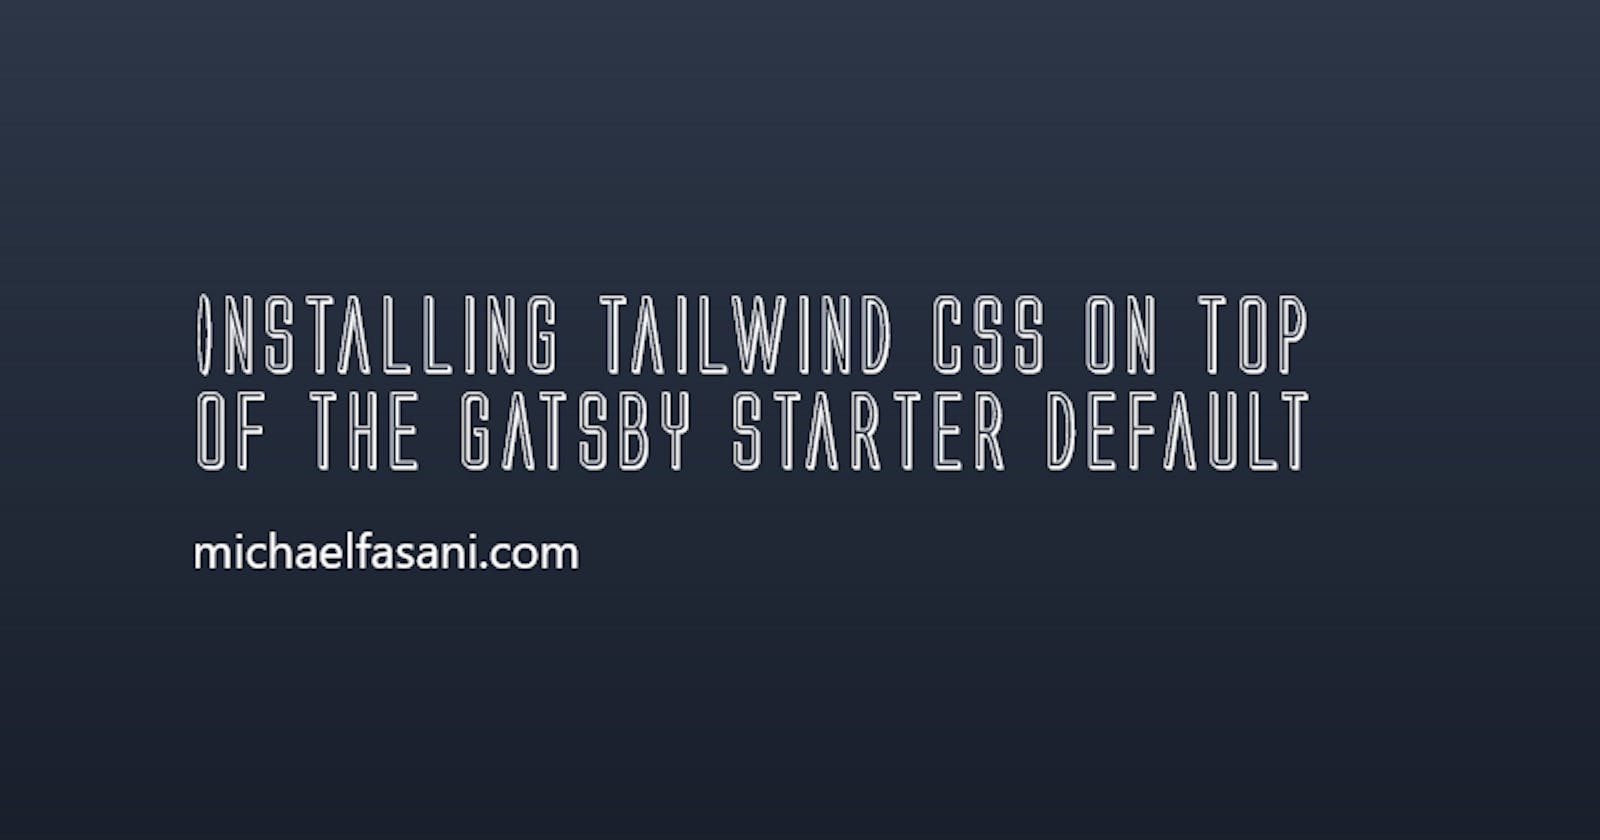 Installing Tailwind CSS on top of the Gatsby starter default